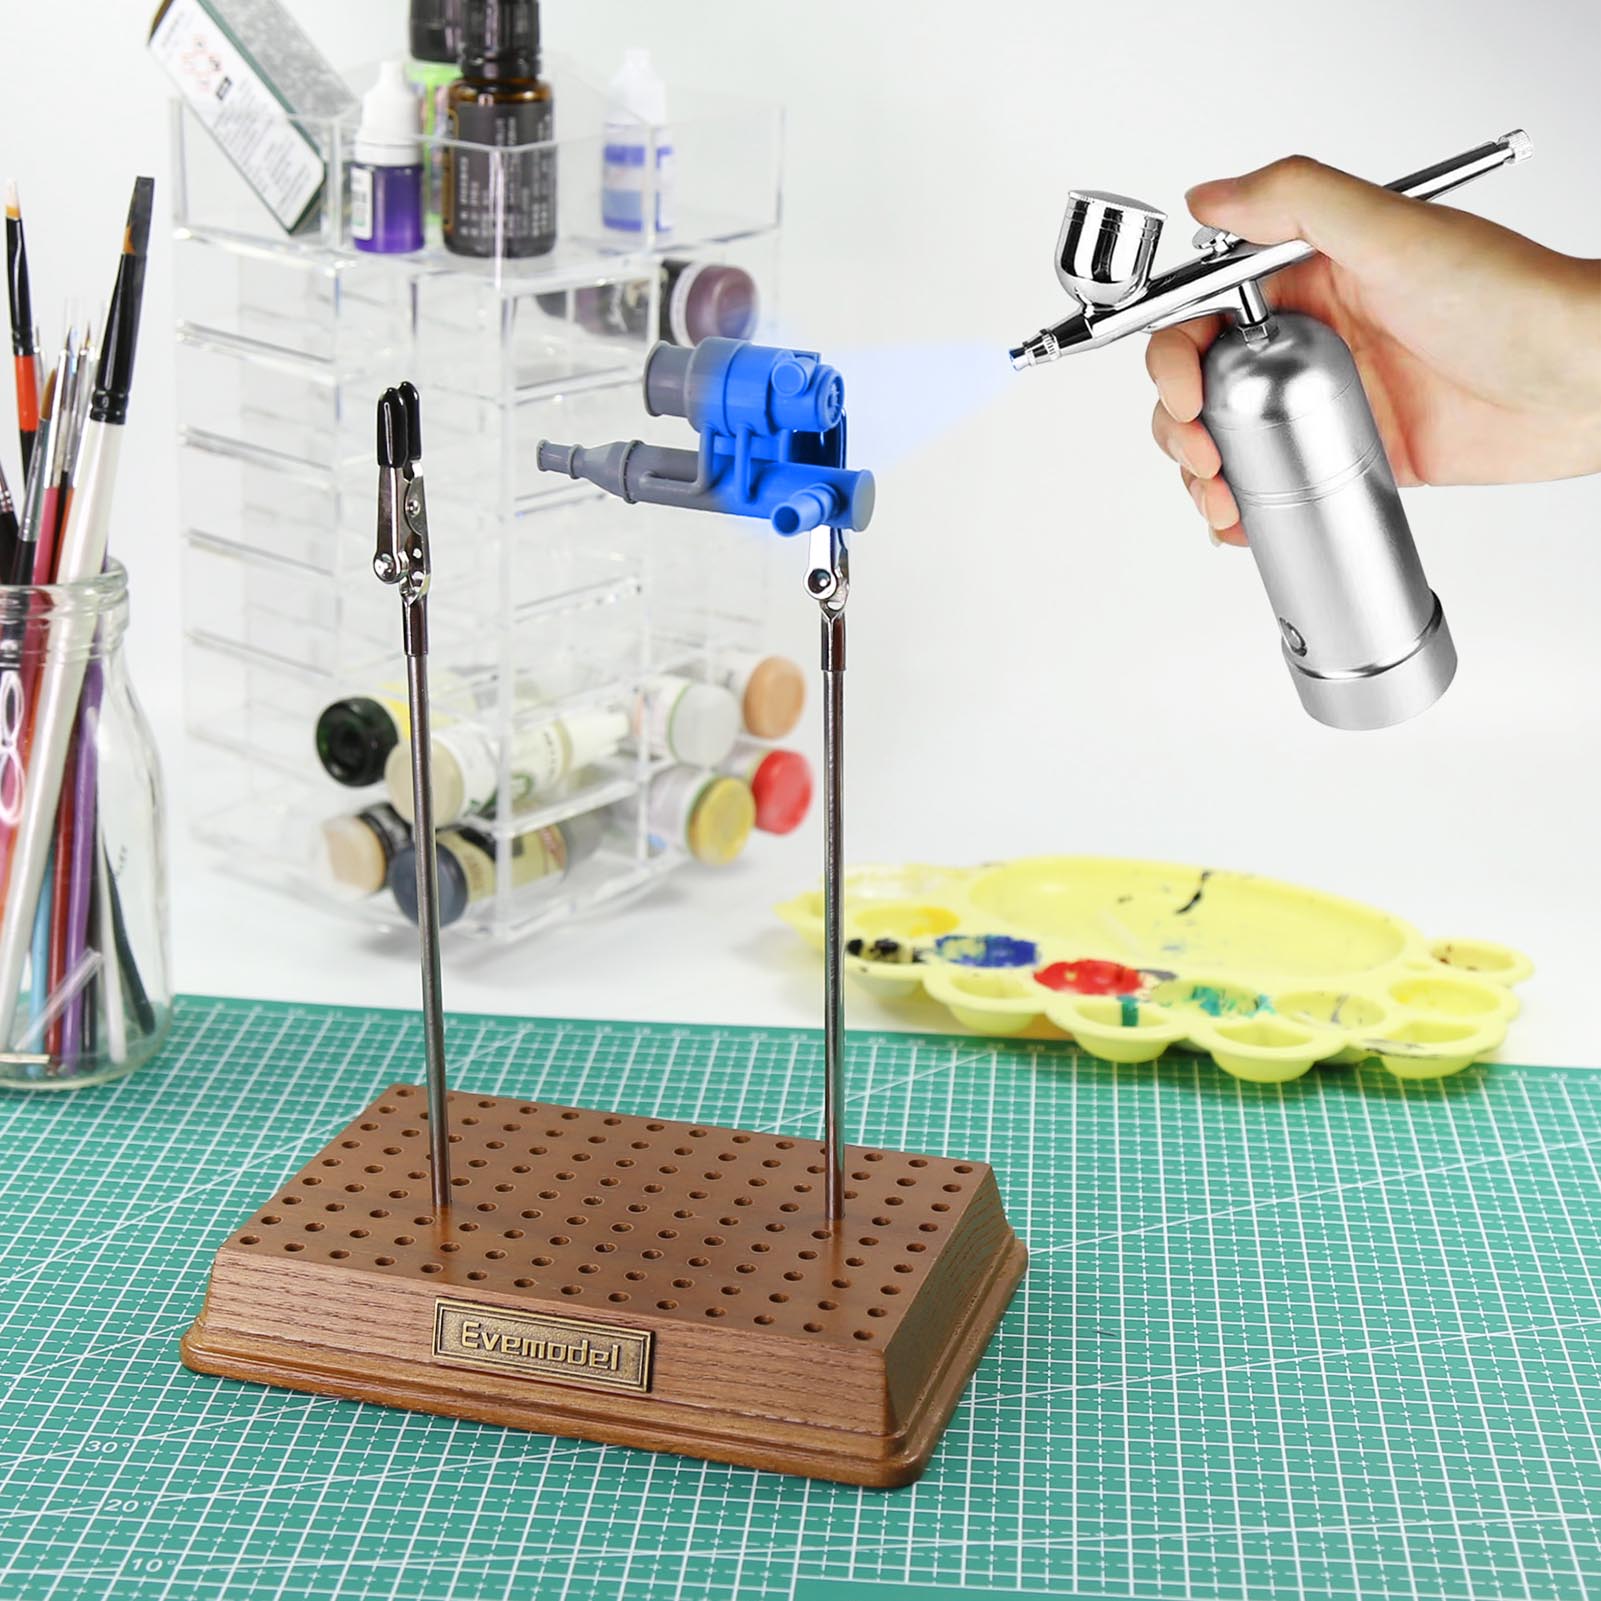 GJJC17AB Metal Alligator Clip Stick Set with Wooden Base Painting Airbrush Tools